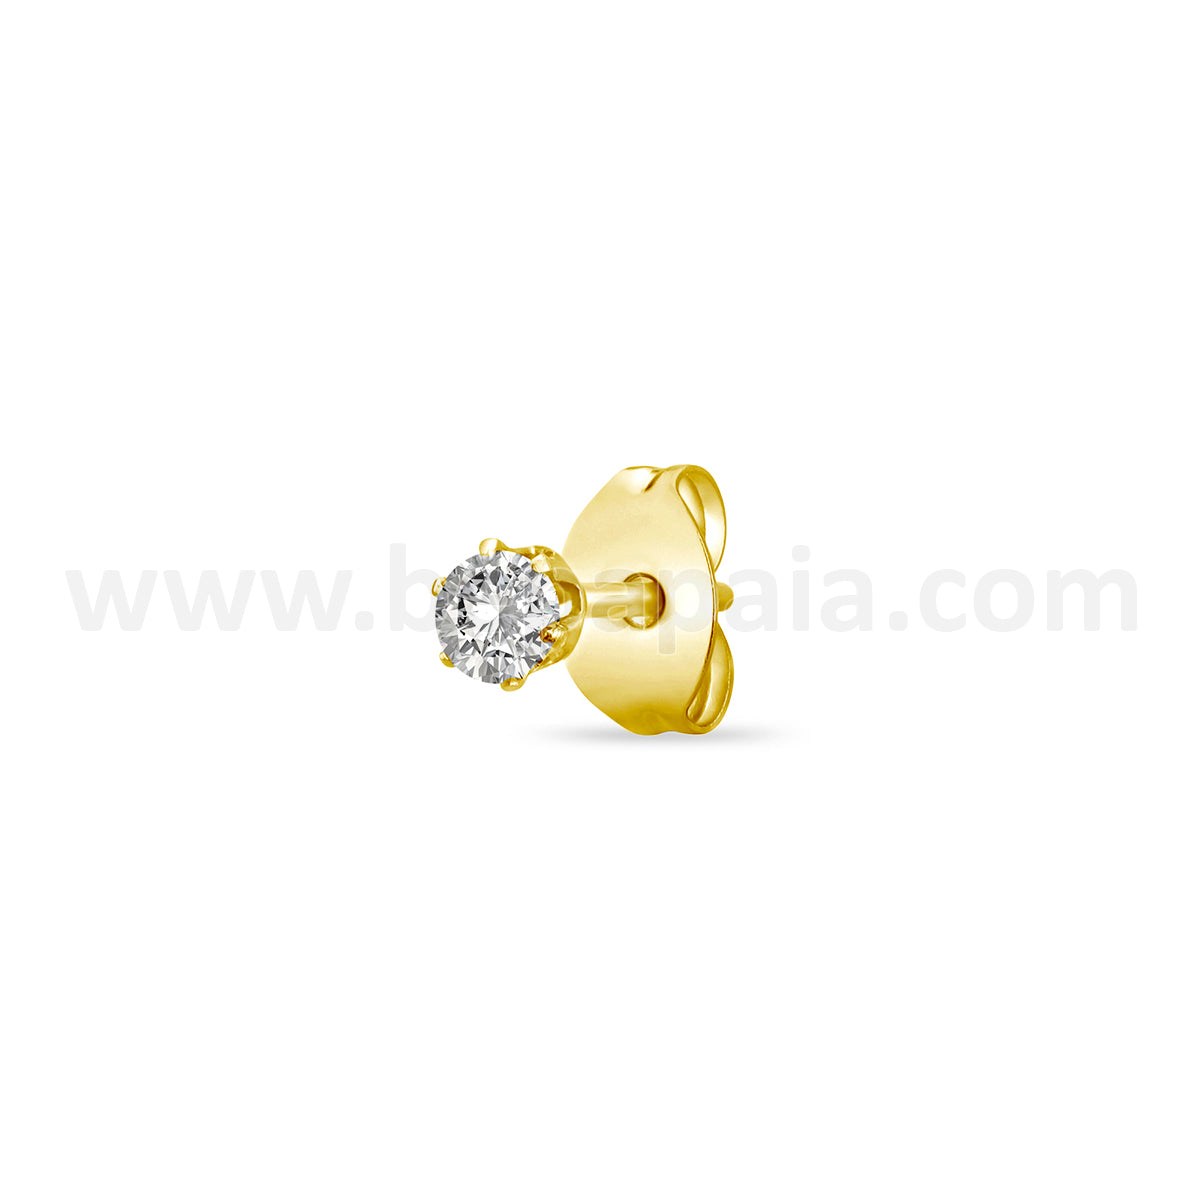 Gold steel ear stud with cubic zirconia